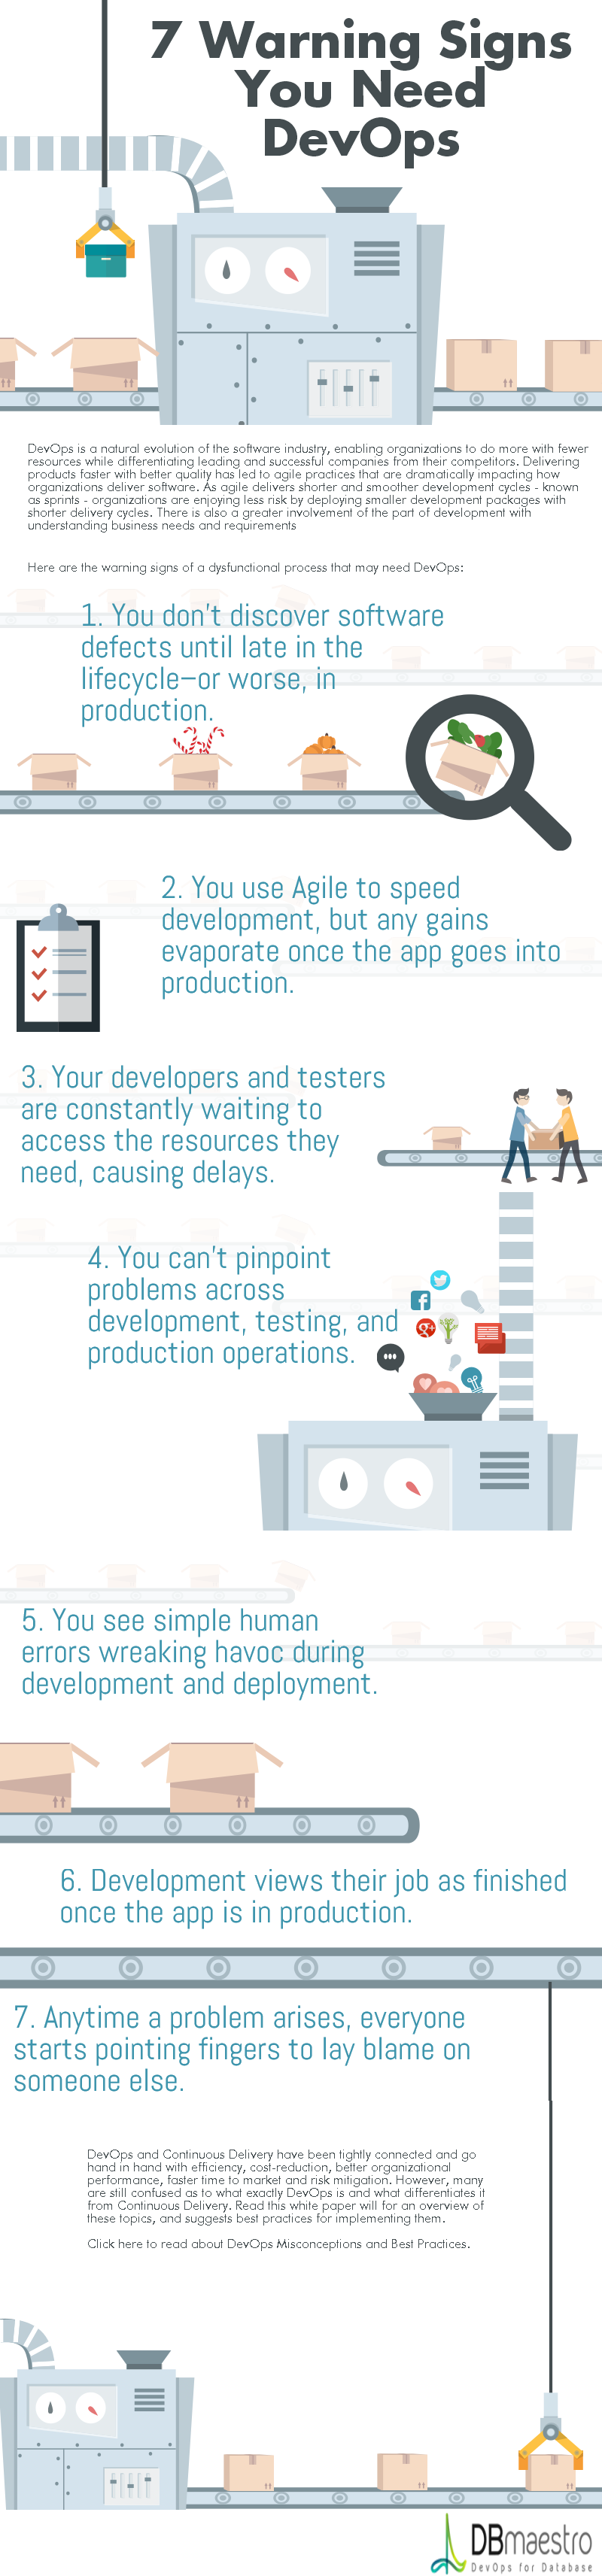 7 Warning Signs You Need DevOps